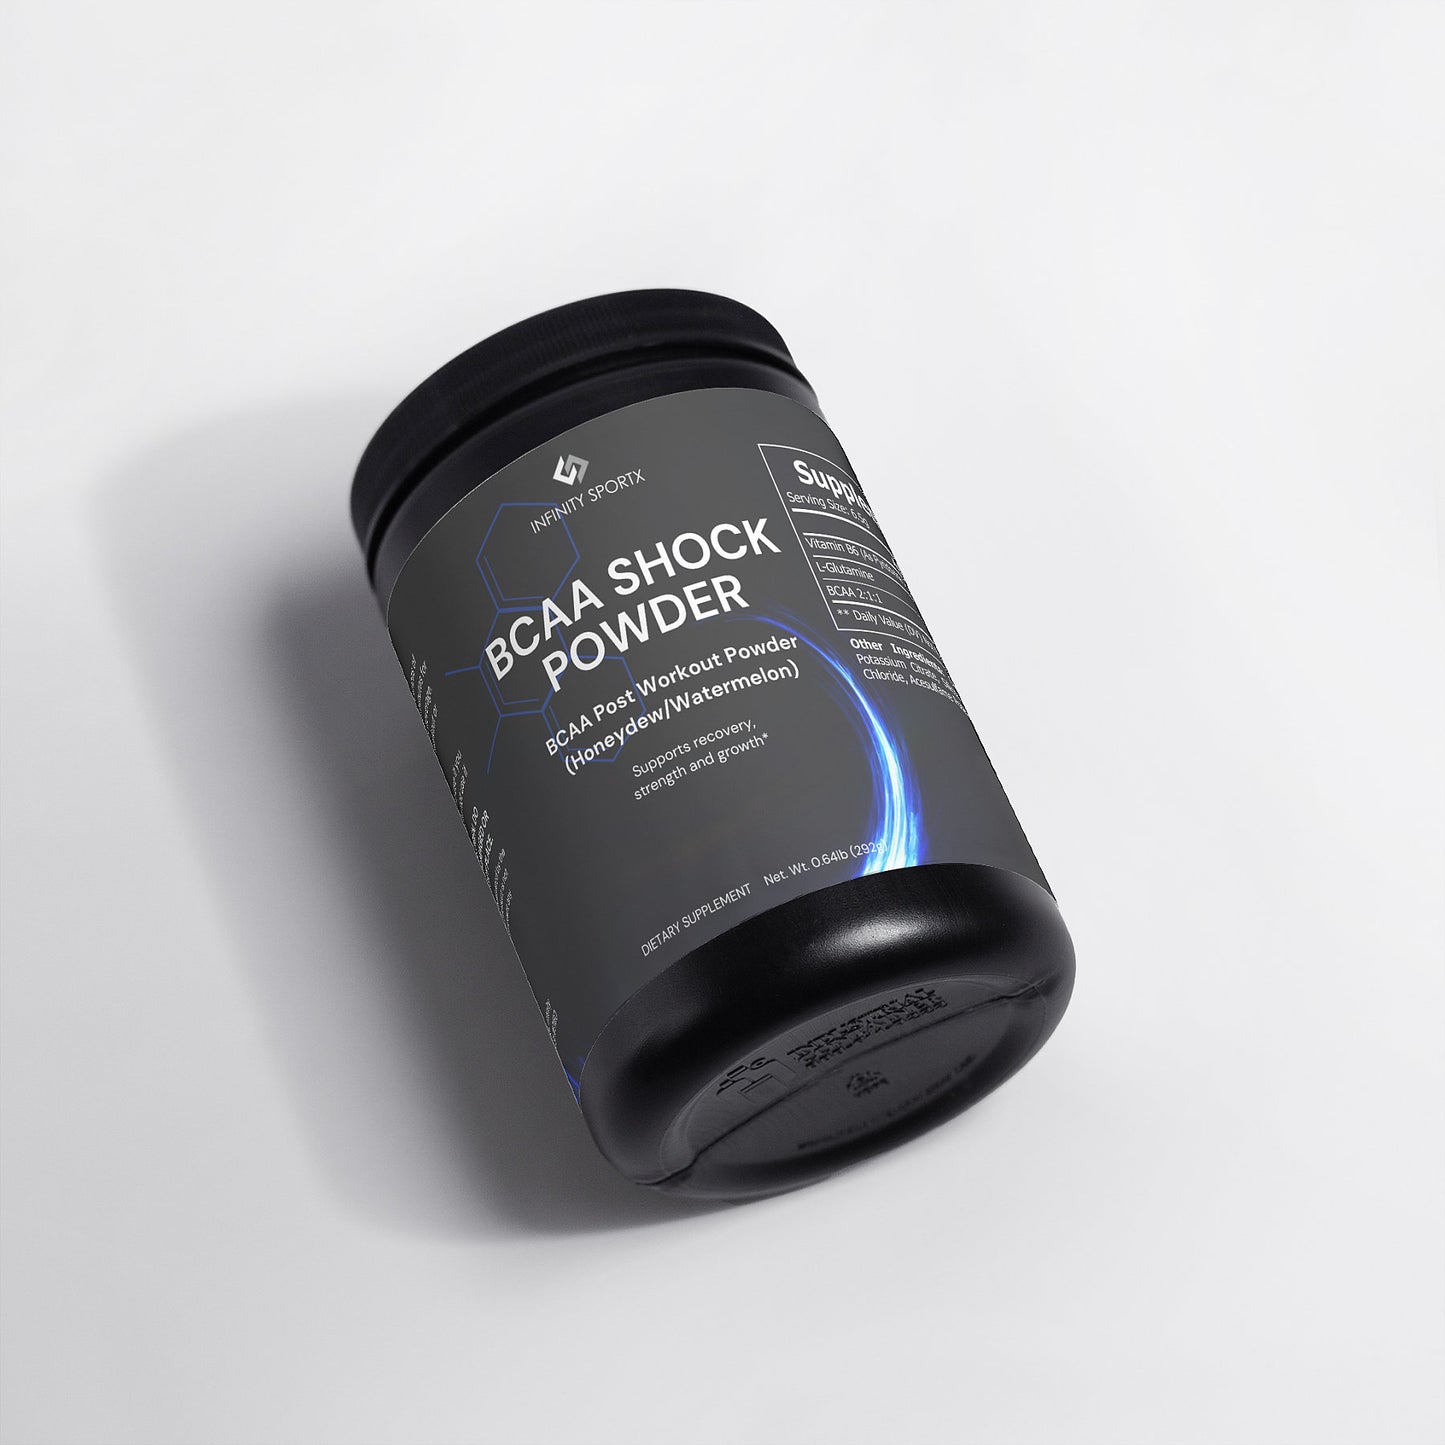 BCAA Post Workout Powder (Honeydew/Watermelon): Optimal Recovery and Muscle Support